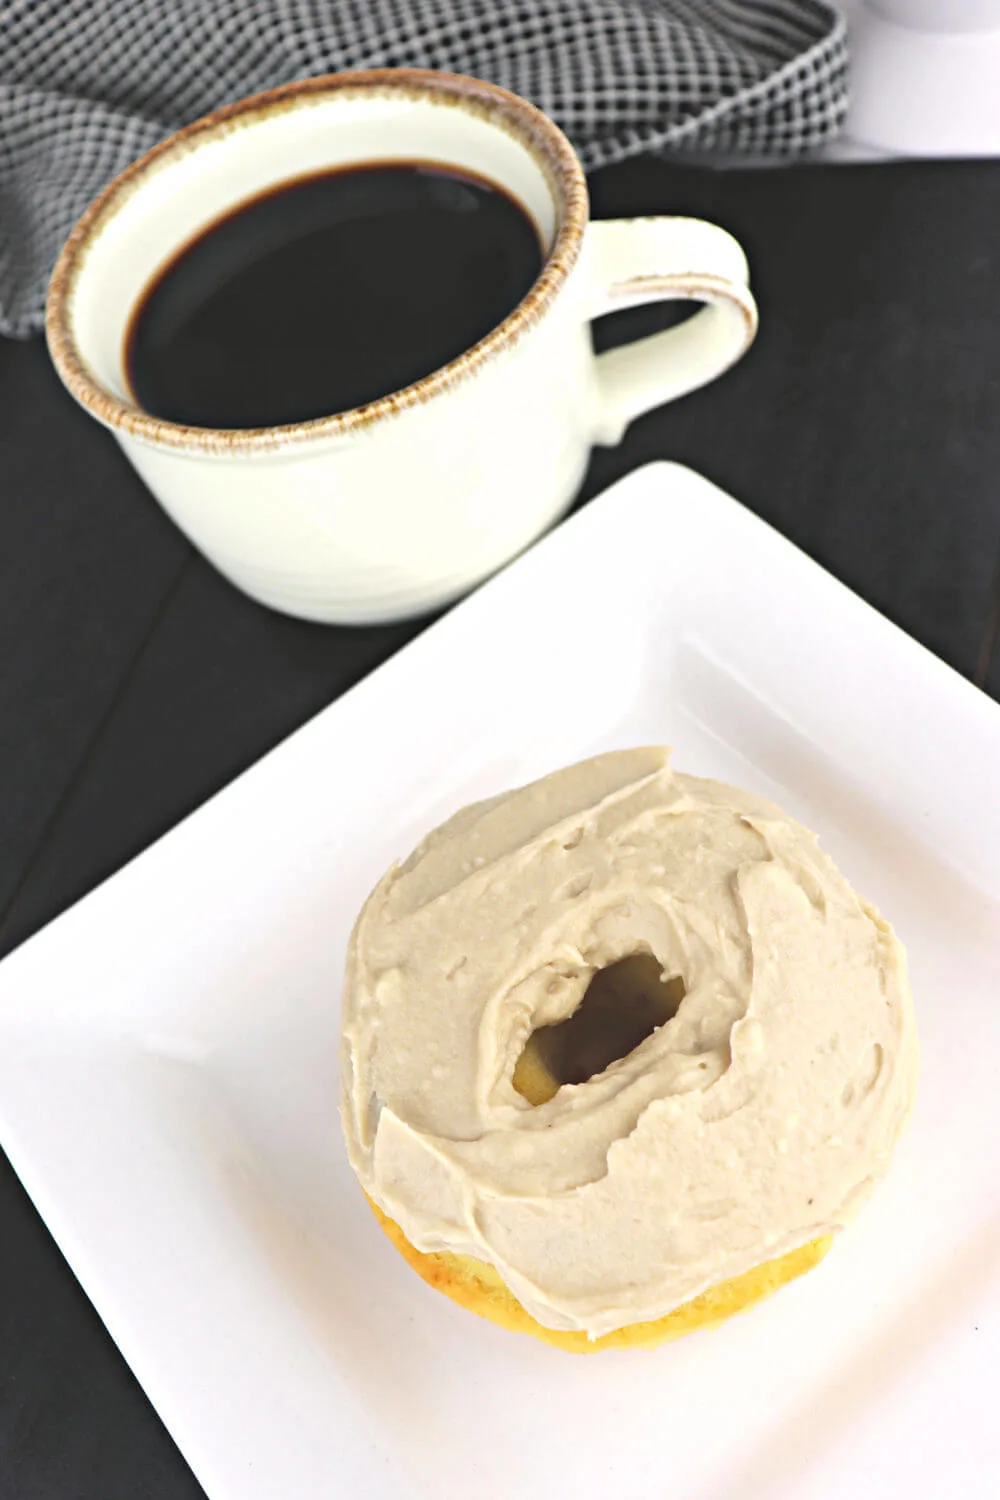 Keto maple donut with a cup of coffee is the perfect low carb breakfast. Picnic or parade, you'll this love moist and delicious gluten-free, sugar-free recipe. #lowcarbdonuts #ketobreakfastrecipes